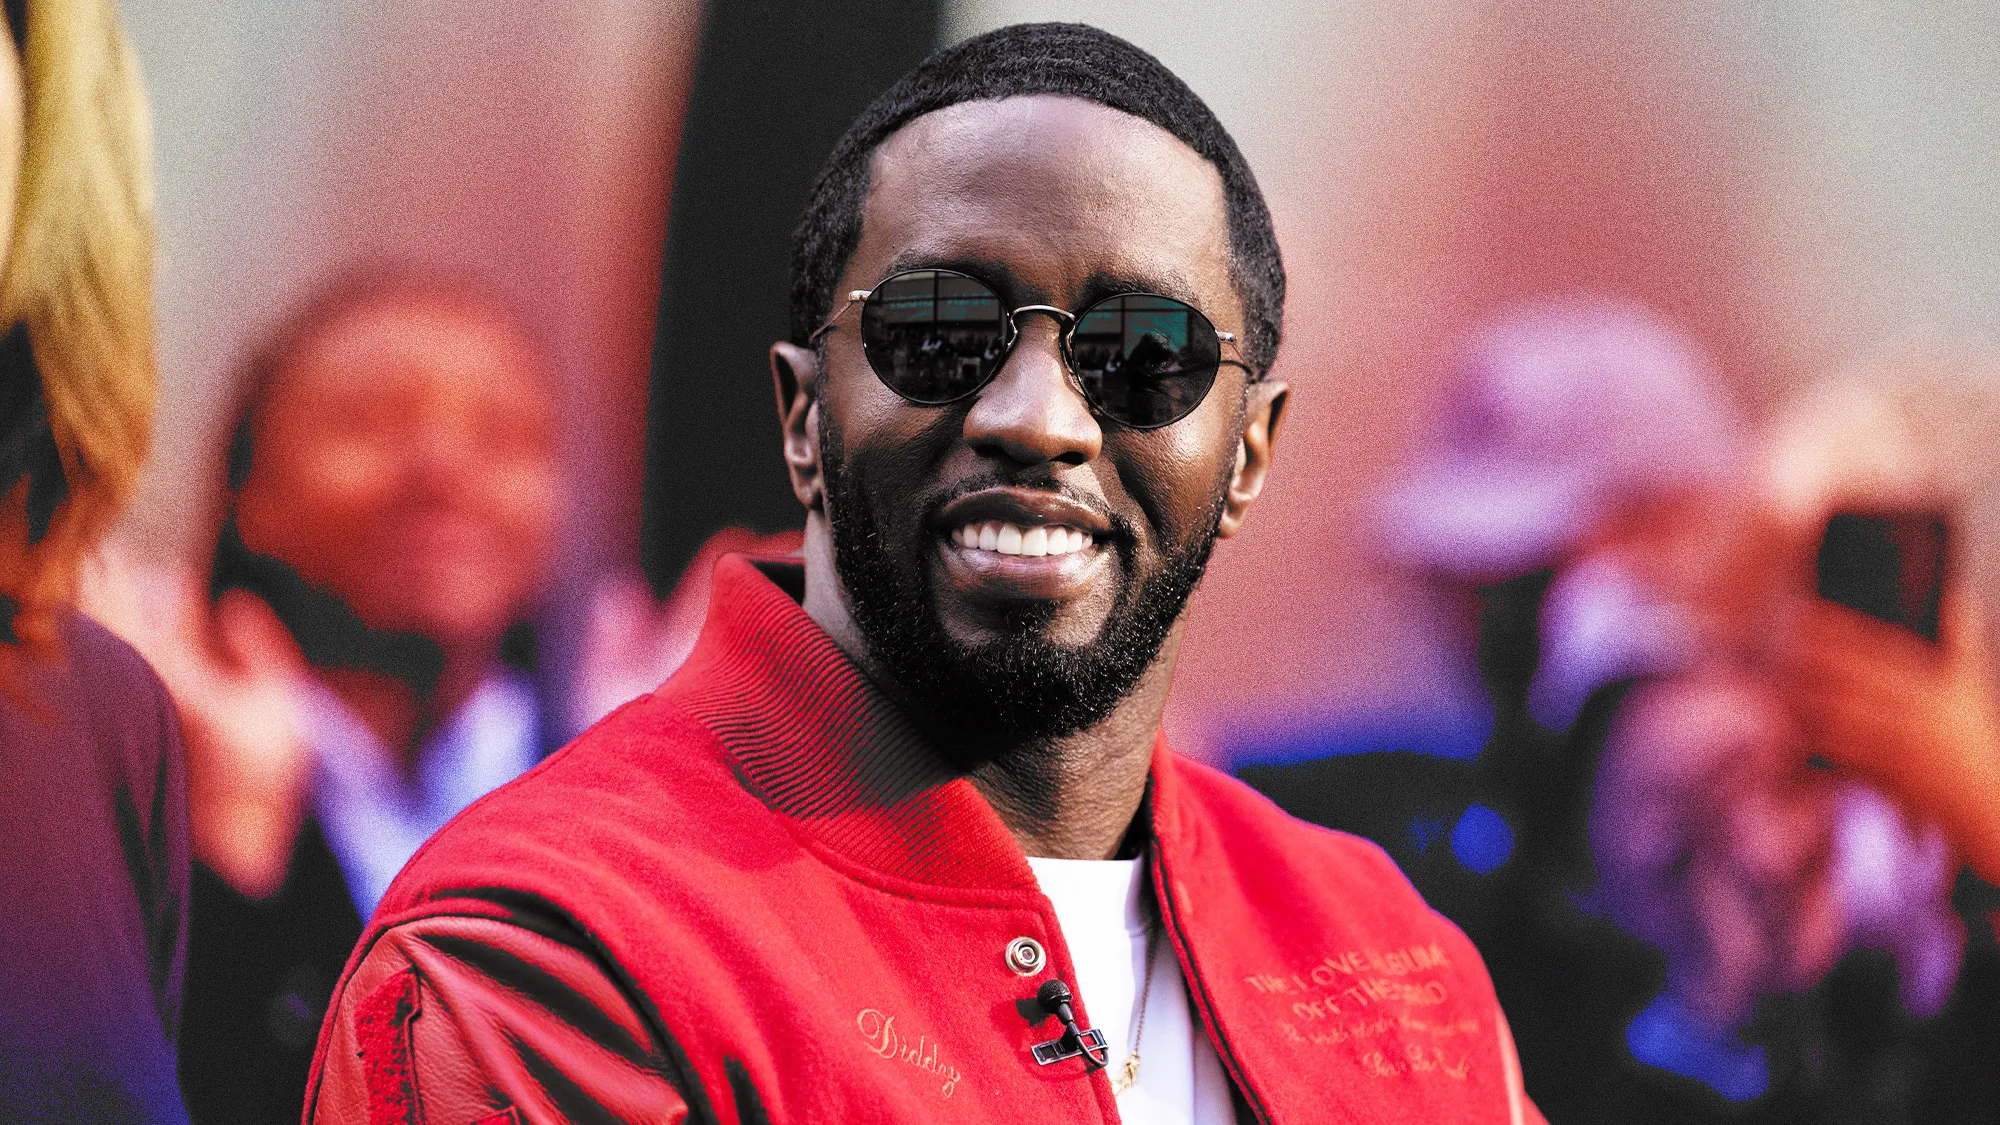 DIDDY🔞: The Hottest New Meme Token Taking the Crypto World by Storm